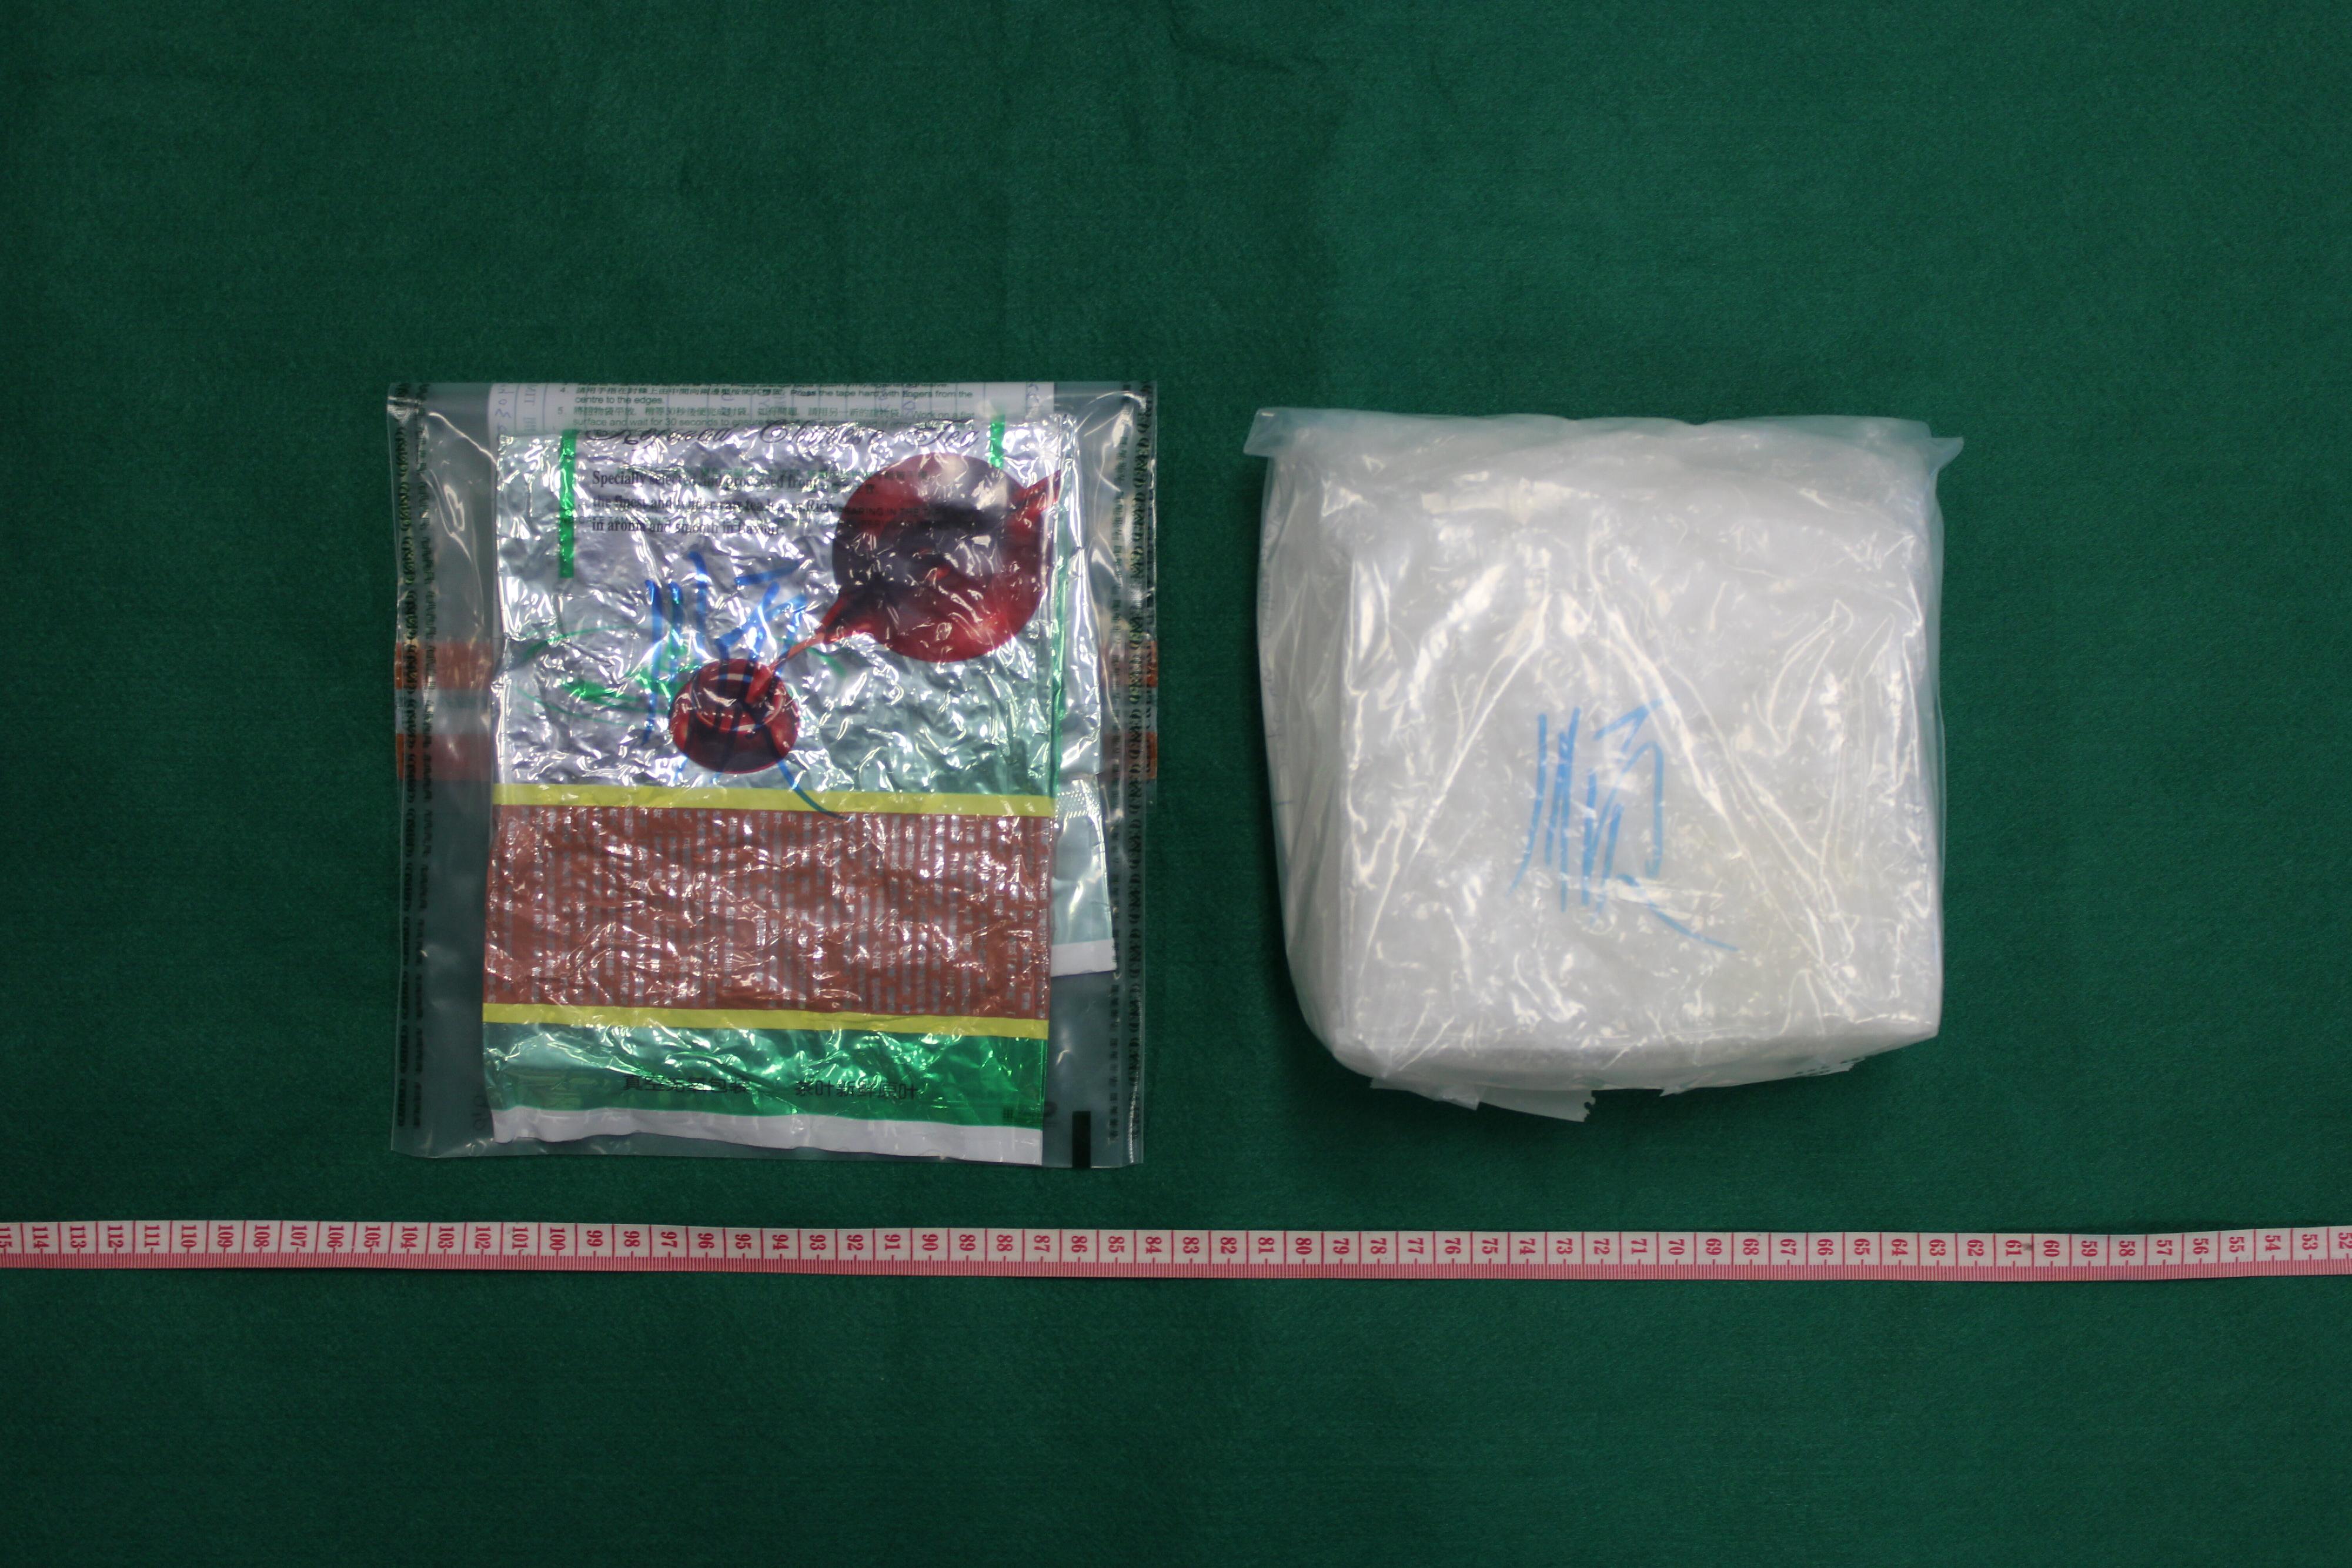 Hong Kong Customs yesterday (September 28) seized about 11 kilograms of suspected methamphetamine in Sheung Shui with an estimated market value of about $6.7 million. Photo shows one of the tea leaf packaging bags with suspected methamphetamine concealed inside.